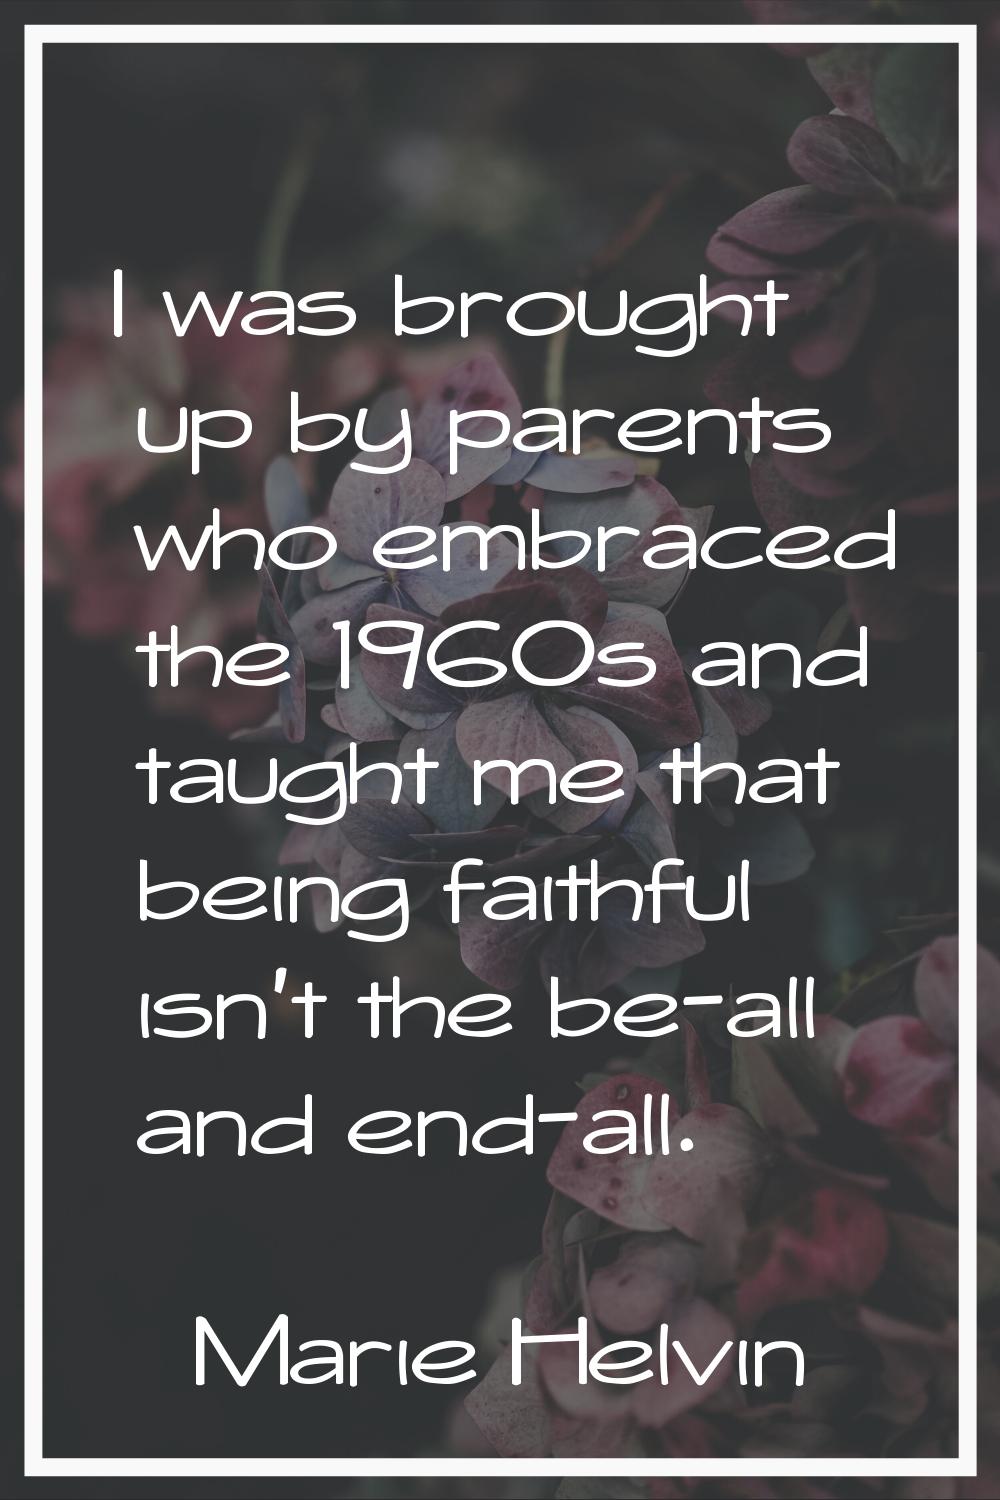 I was brought up by parents who embraced the 1960s and taught me that being faithful isn't the be-a